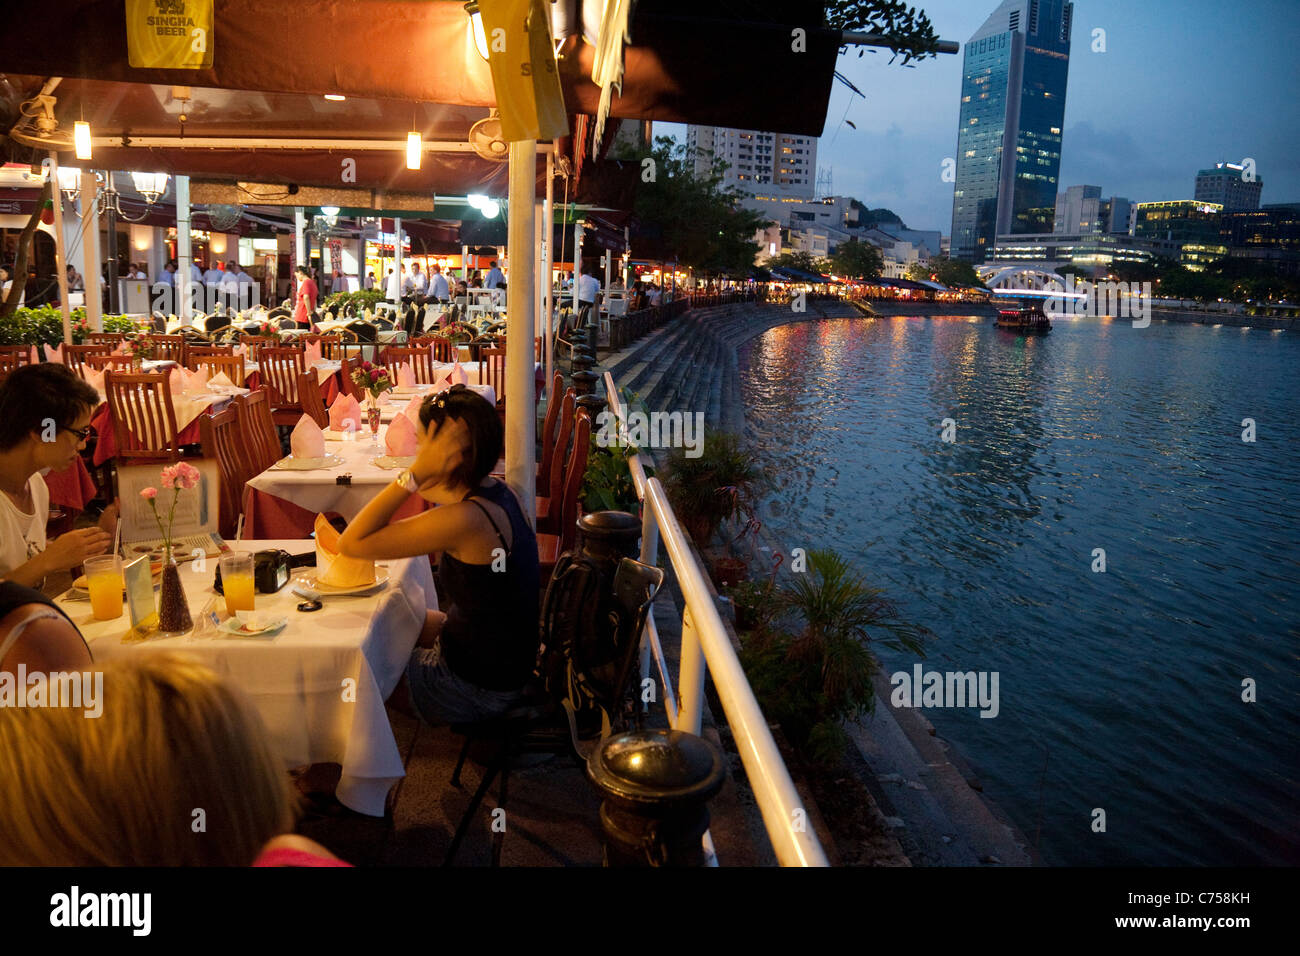 People eating at restaurants on Boat Quay by the Singapore River, Singapore asia Stock Photo